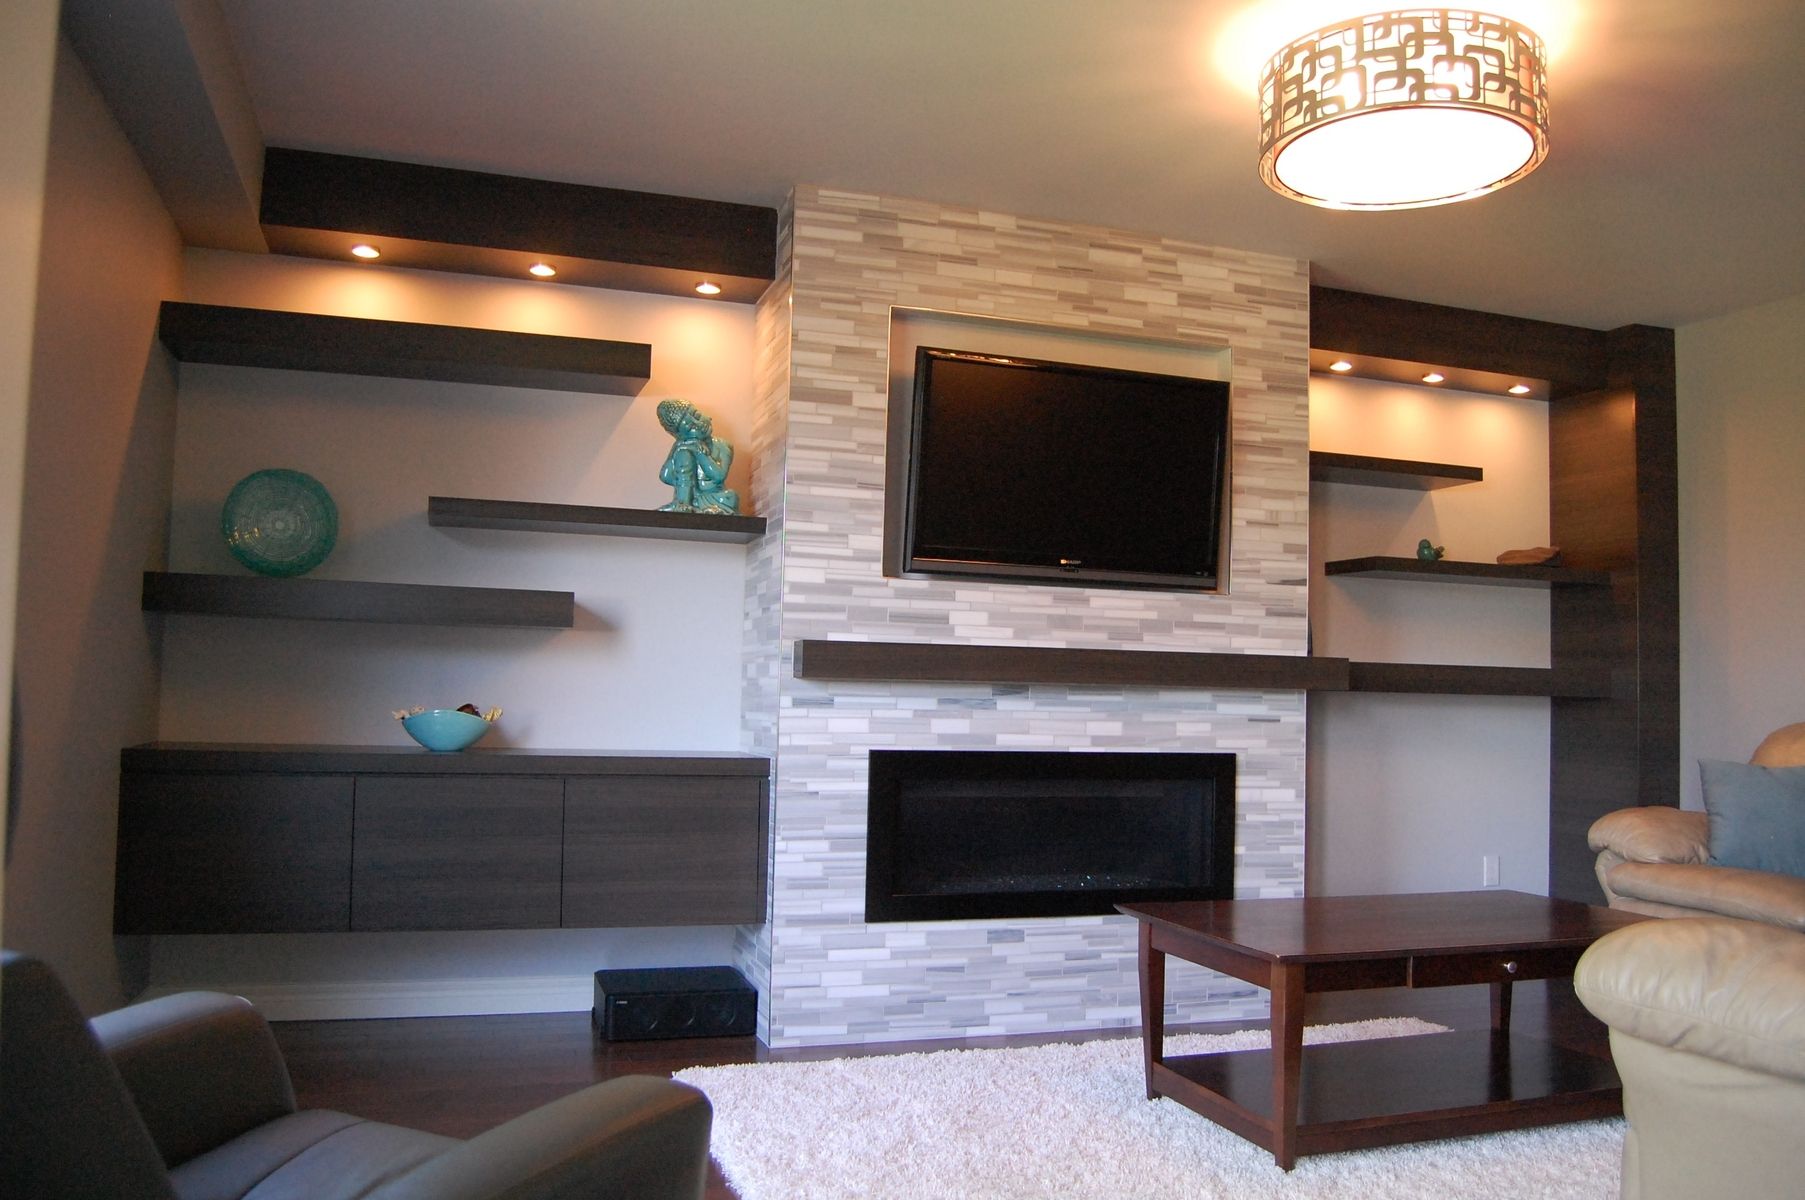 Tv Above Fireplace where to Put Cable Box Luxury Custom Modern Wall Unit Made Pletely From A Printed